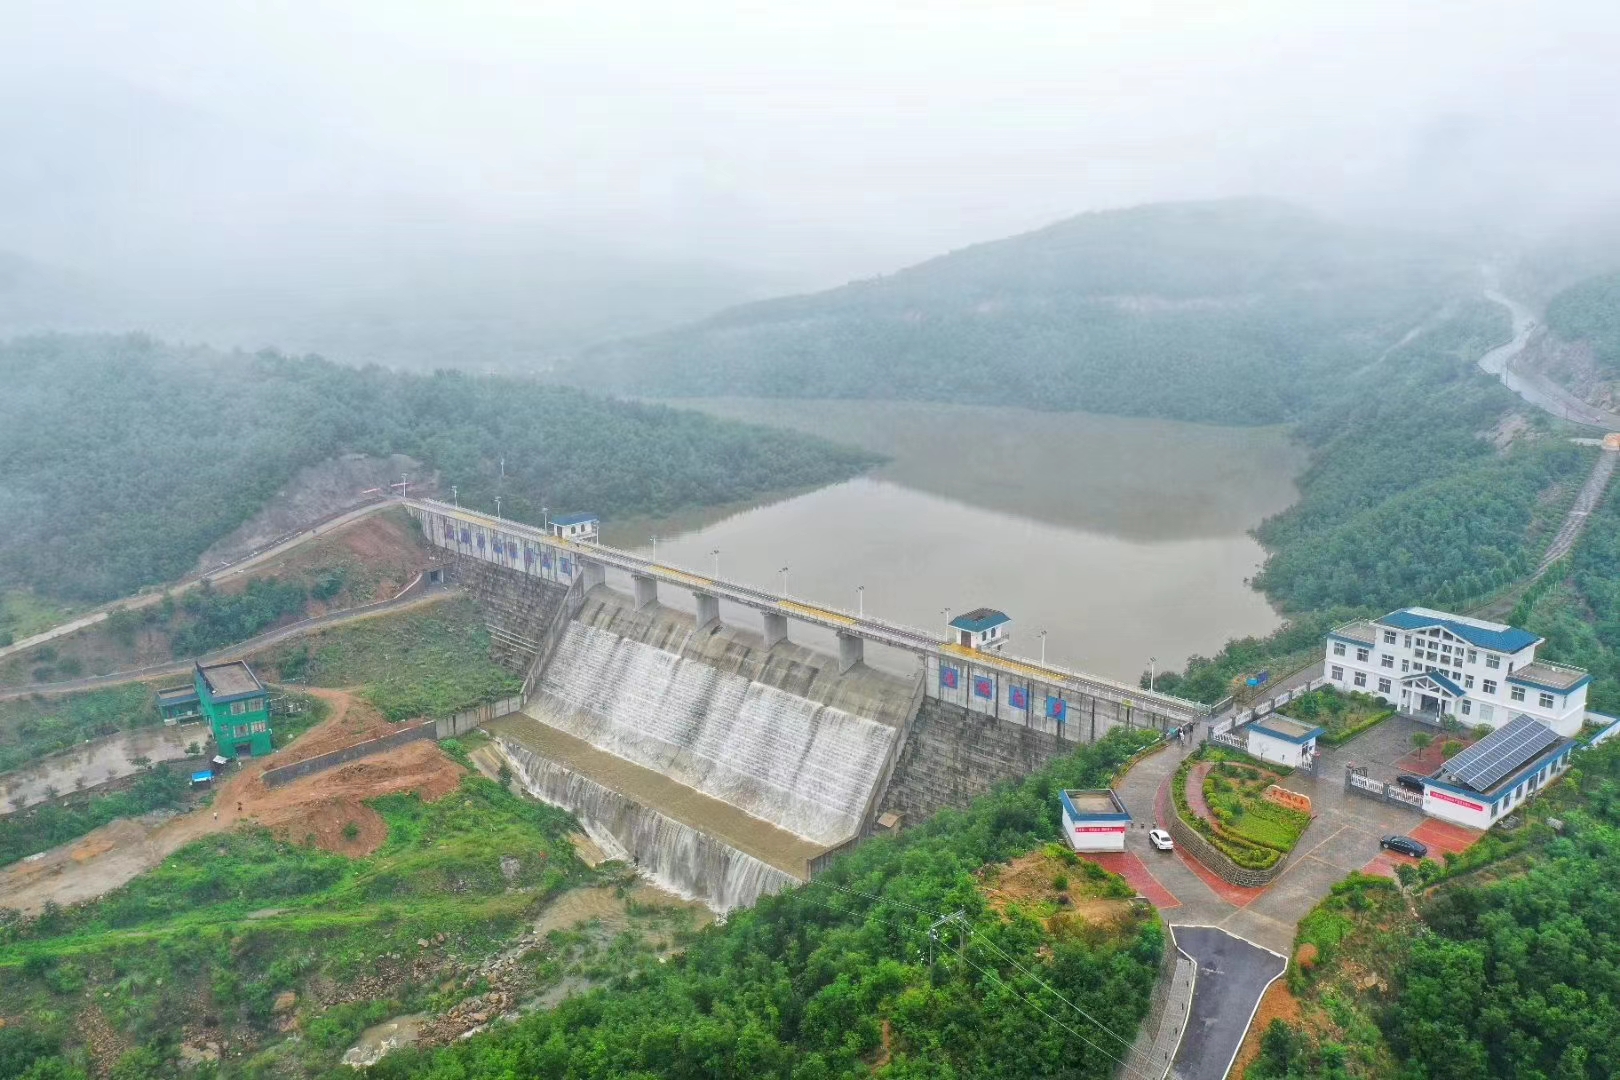 LIKE valves helped the successful completion of the South-to-North Water Diversion project in Henan, China, and supplied tens of millions of valve products